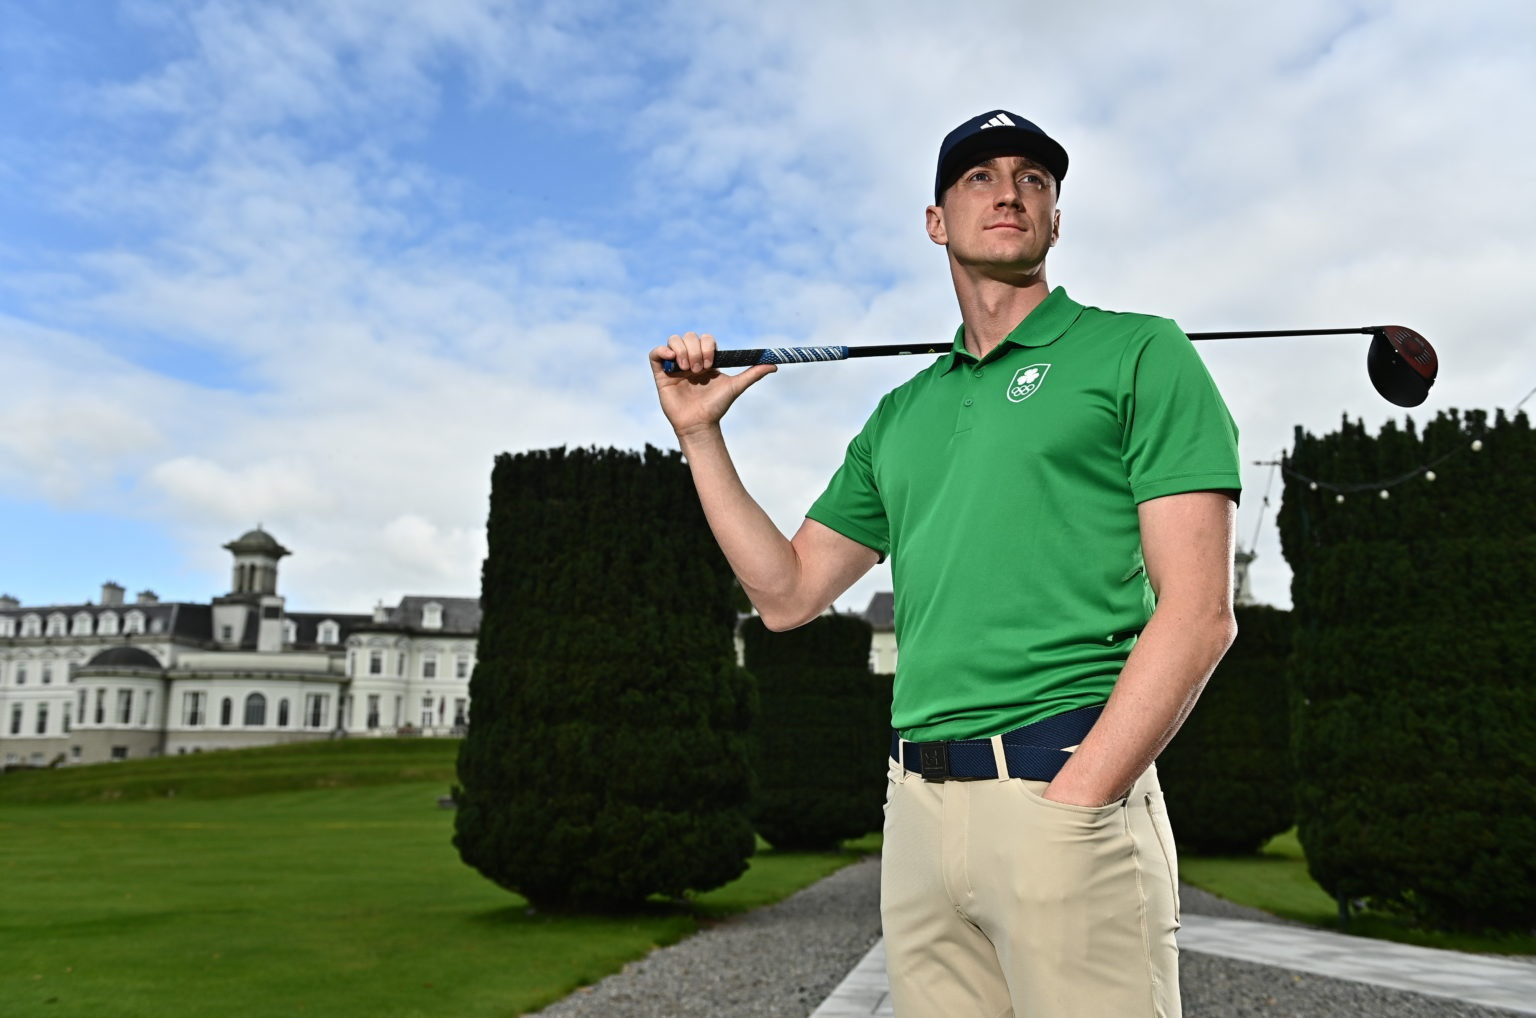 Olympians take part in Ireland NOC golf event to raise funds for athletes